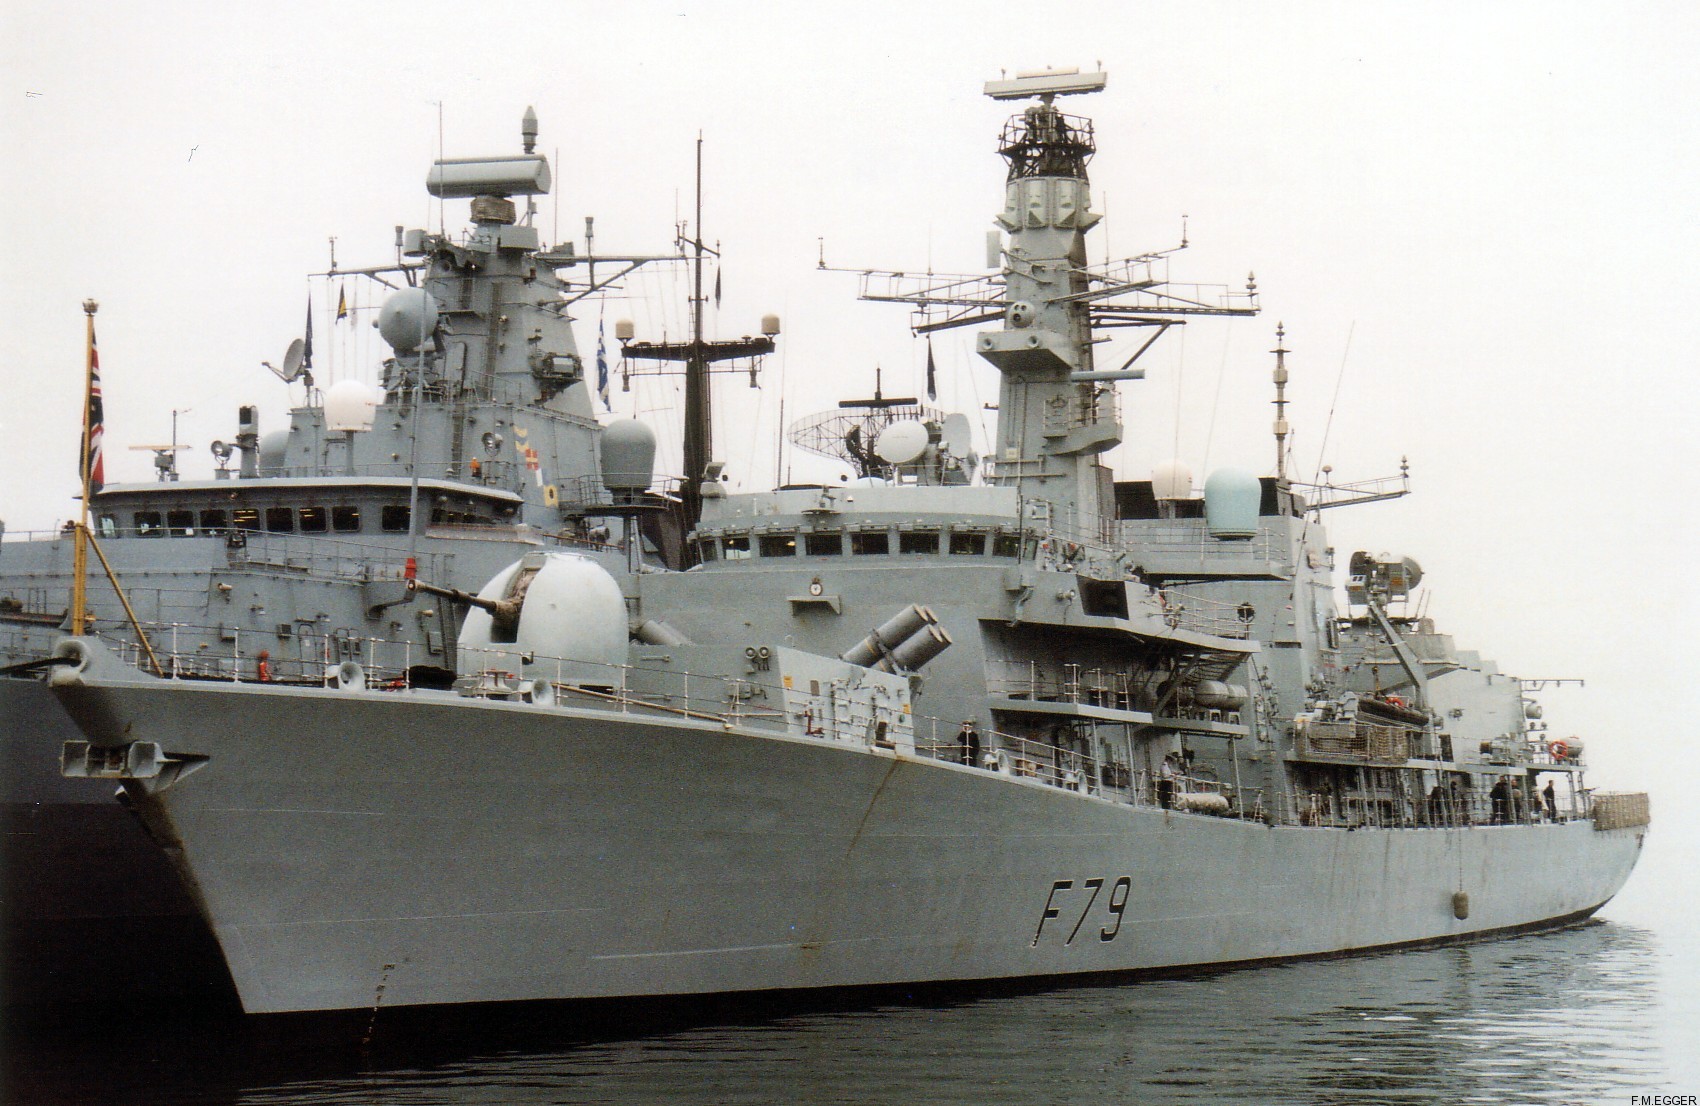 f-79 hms portland type 23 duke class guided missile frigate ffg royal navy 17 trieste italy nato snmg